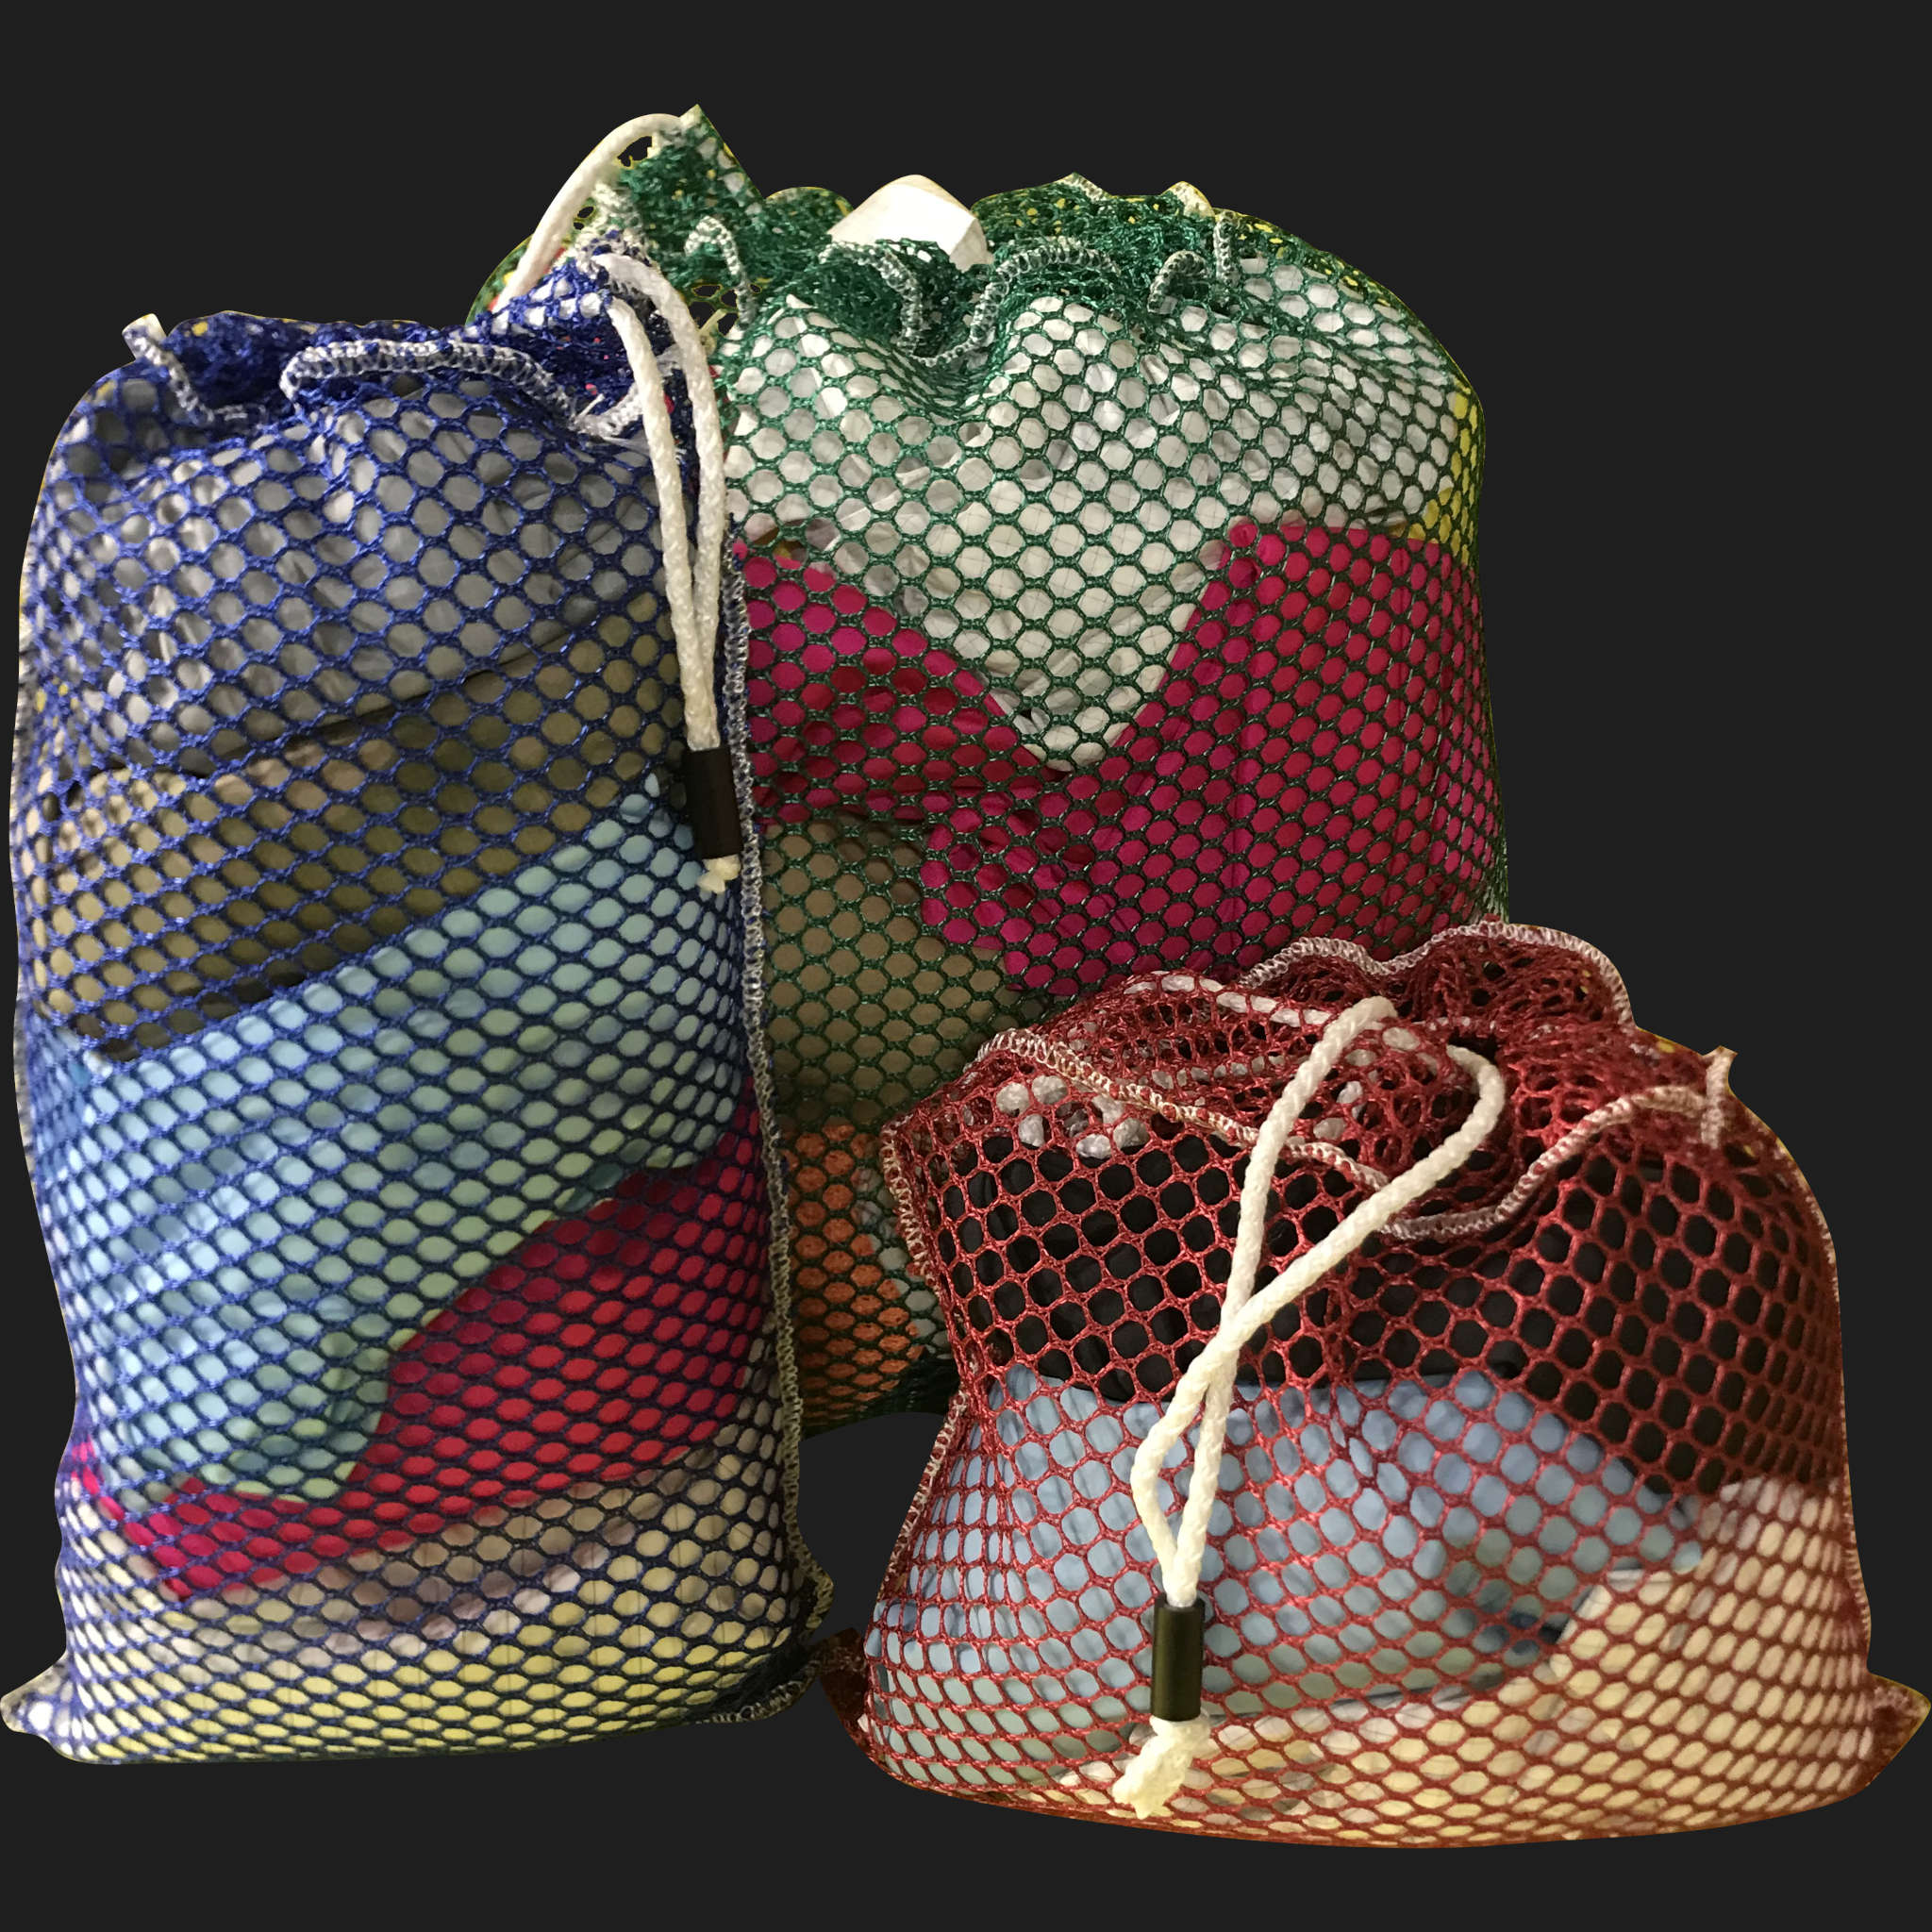 32" x 52" Customized Mesh-Net-Laundry Bags Heavy Duty with Cord and barrellock closure